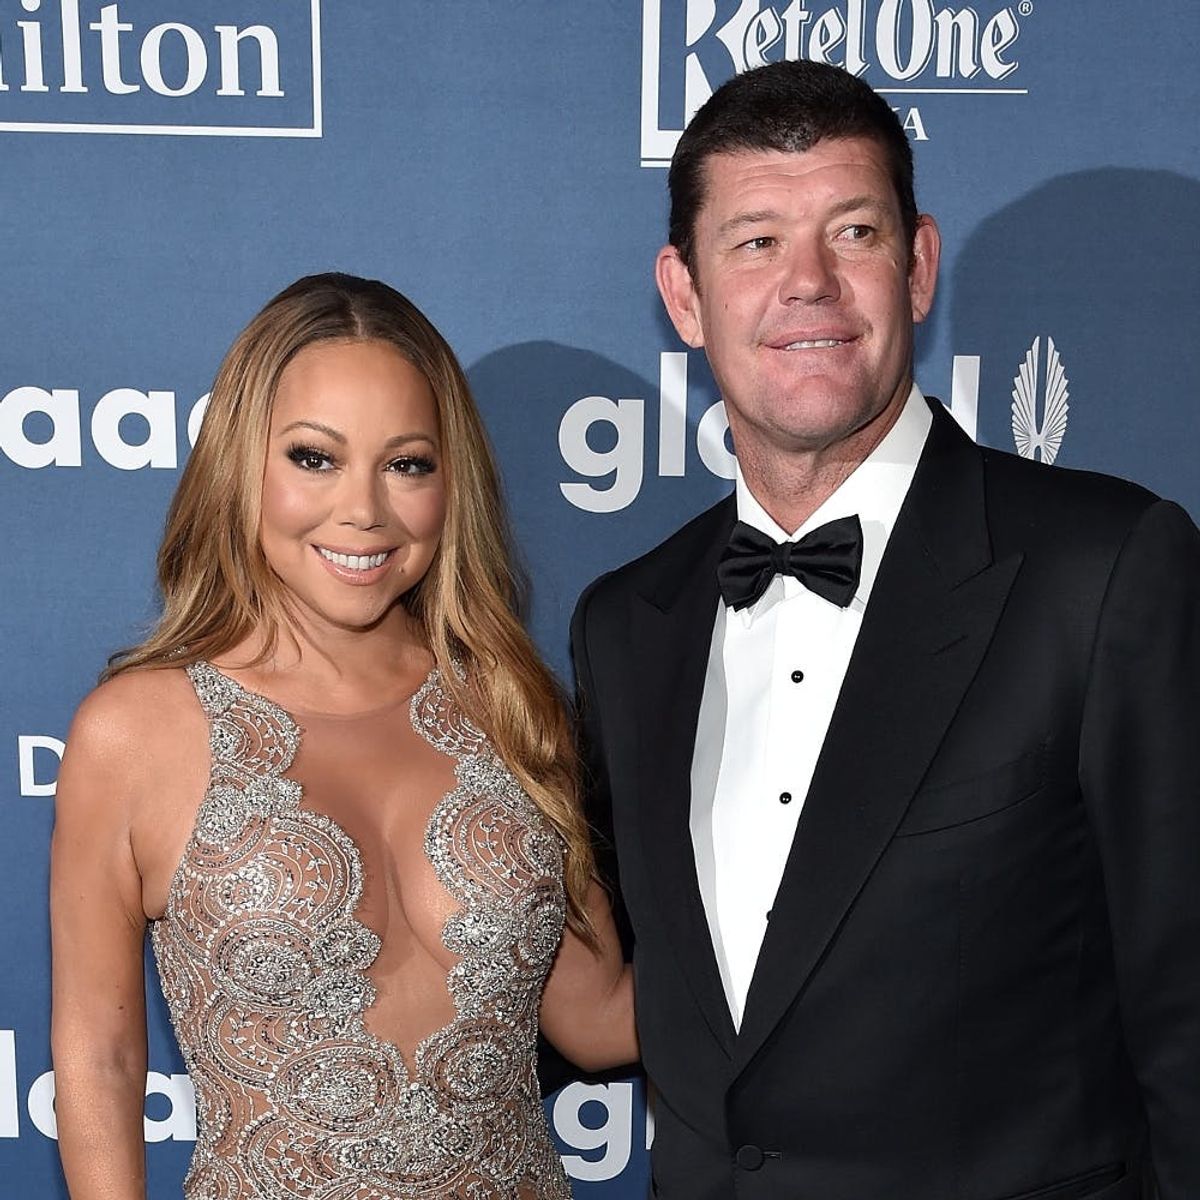 This Is the Likely (and Sad) Fate of Mariah Carey’s $10 Million Engagement Ring